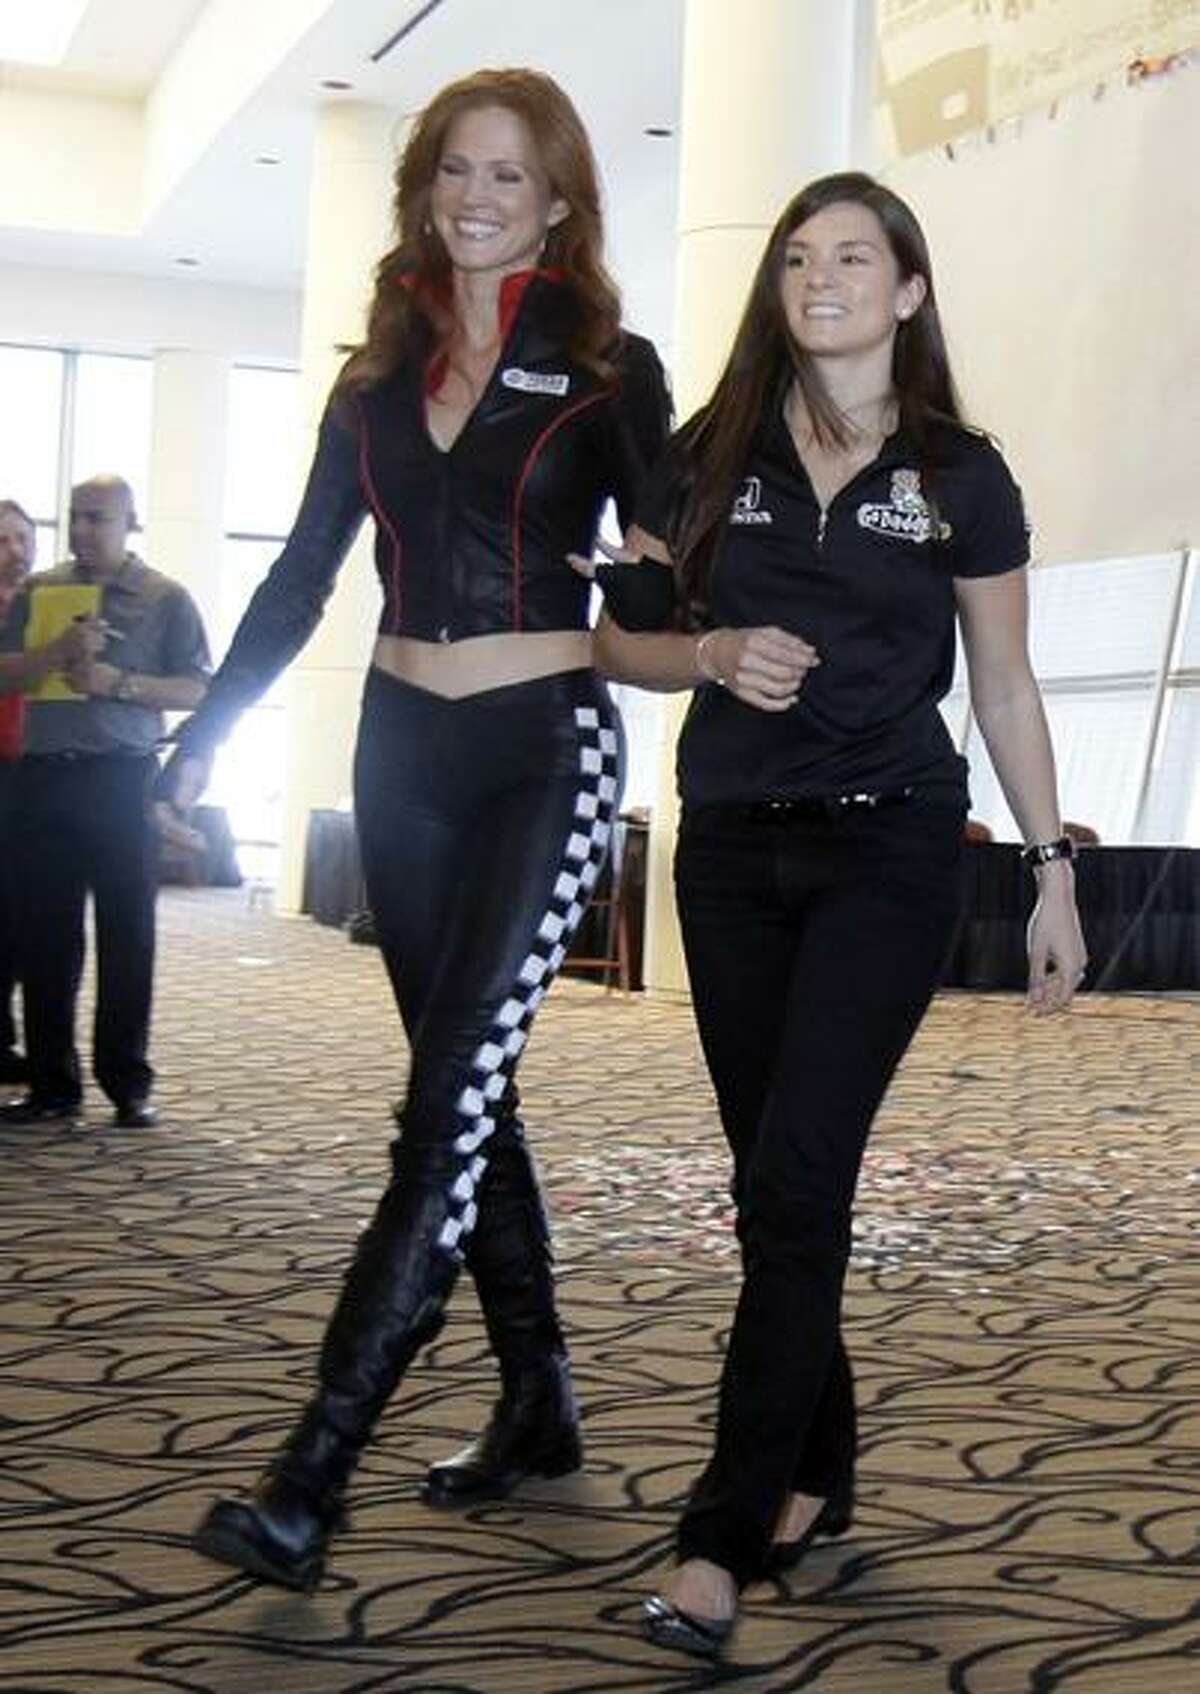 Driver Danica Patrick, right, is escorted during media day at Texas Motor Speedway in Fort Worth, Wednesday, Texas March 2, 2011. (AP Photo/LM Otero)